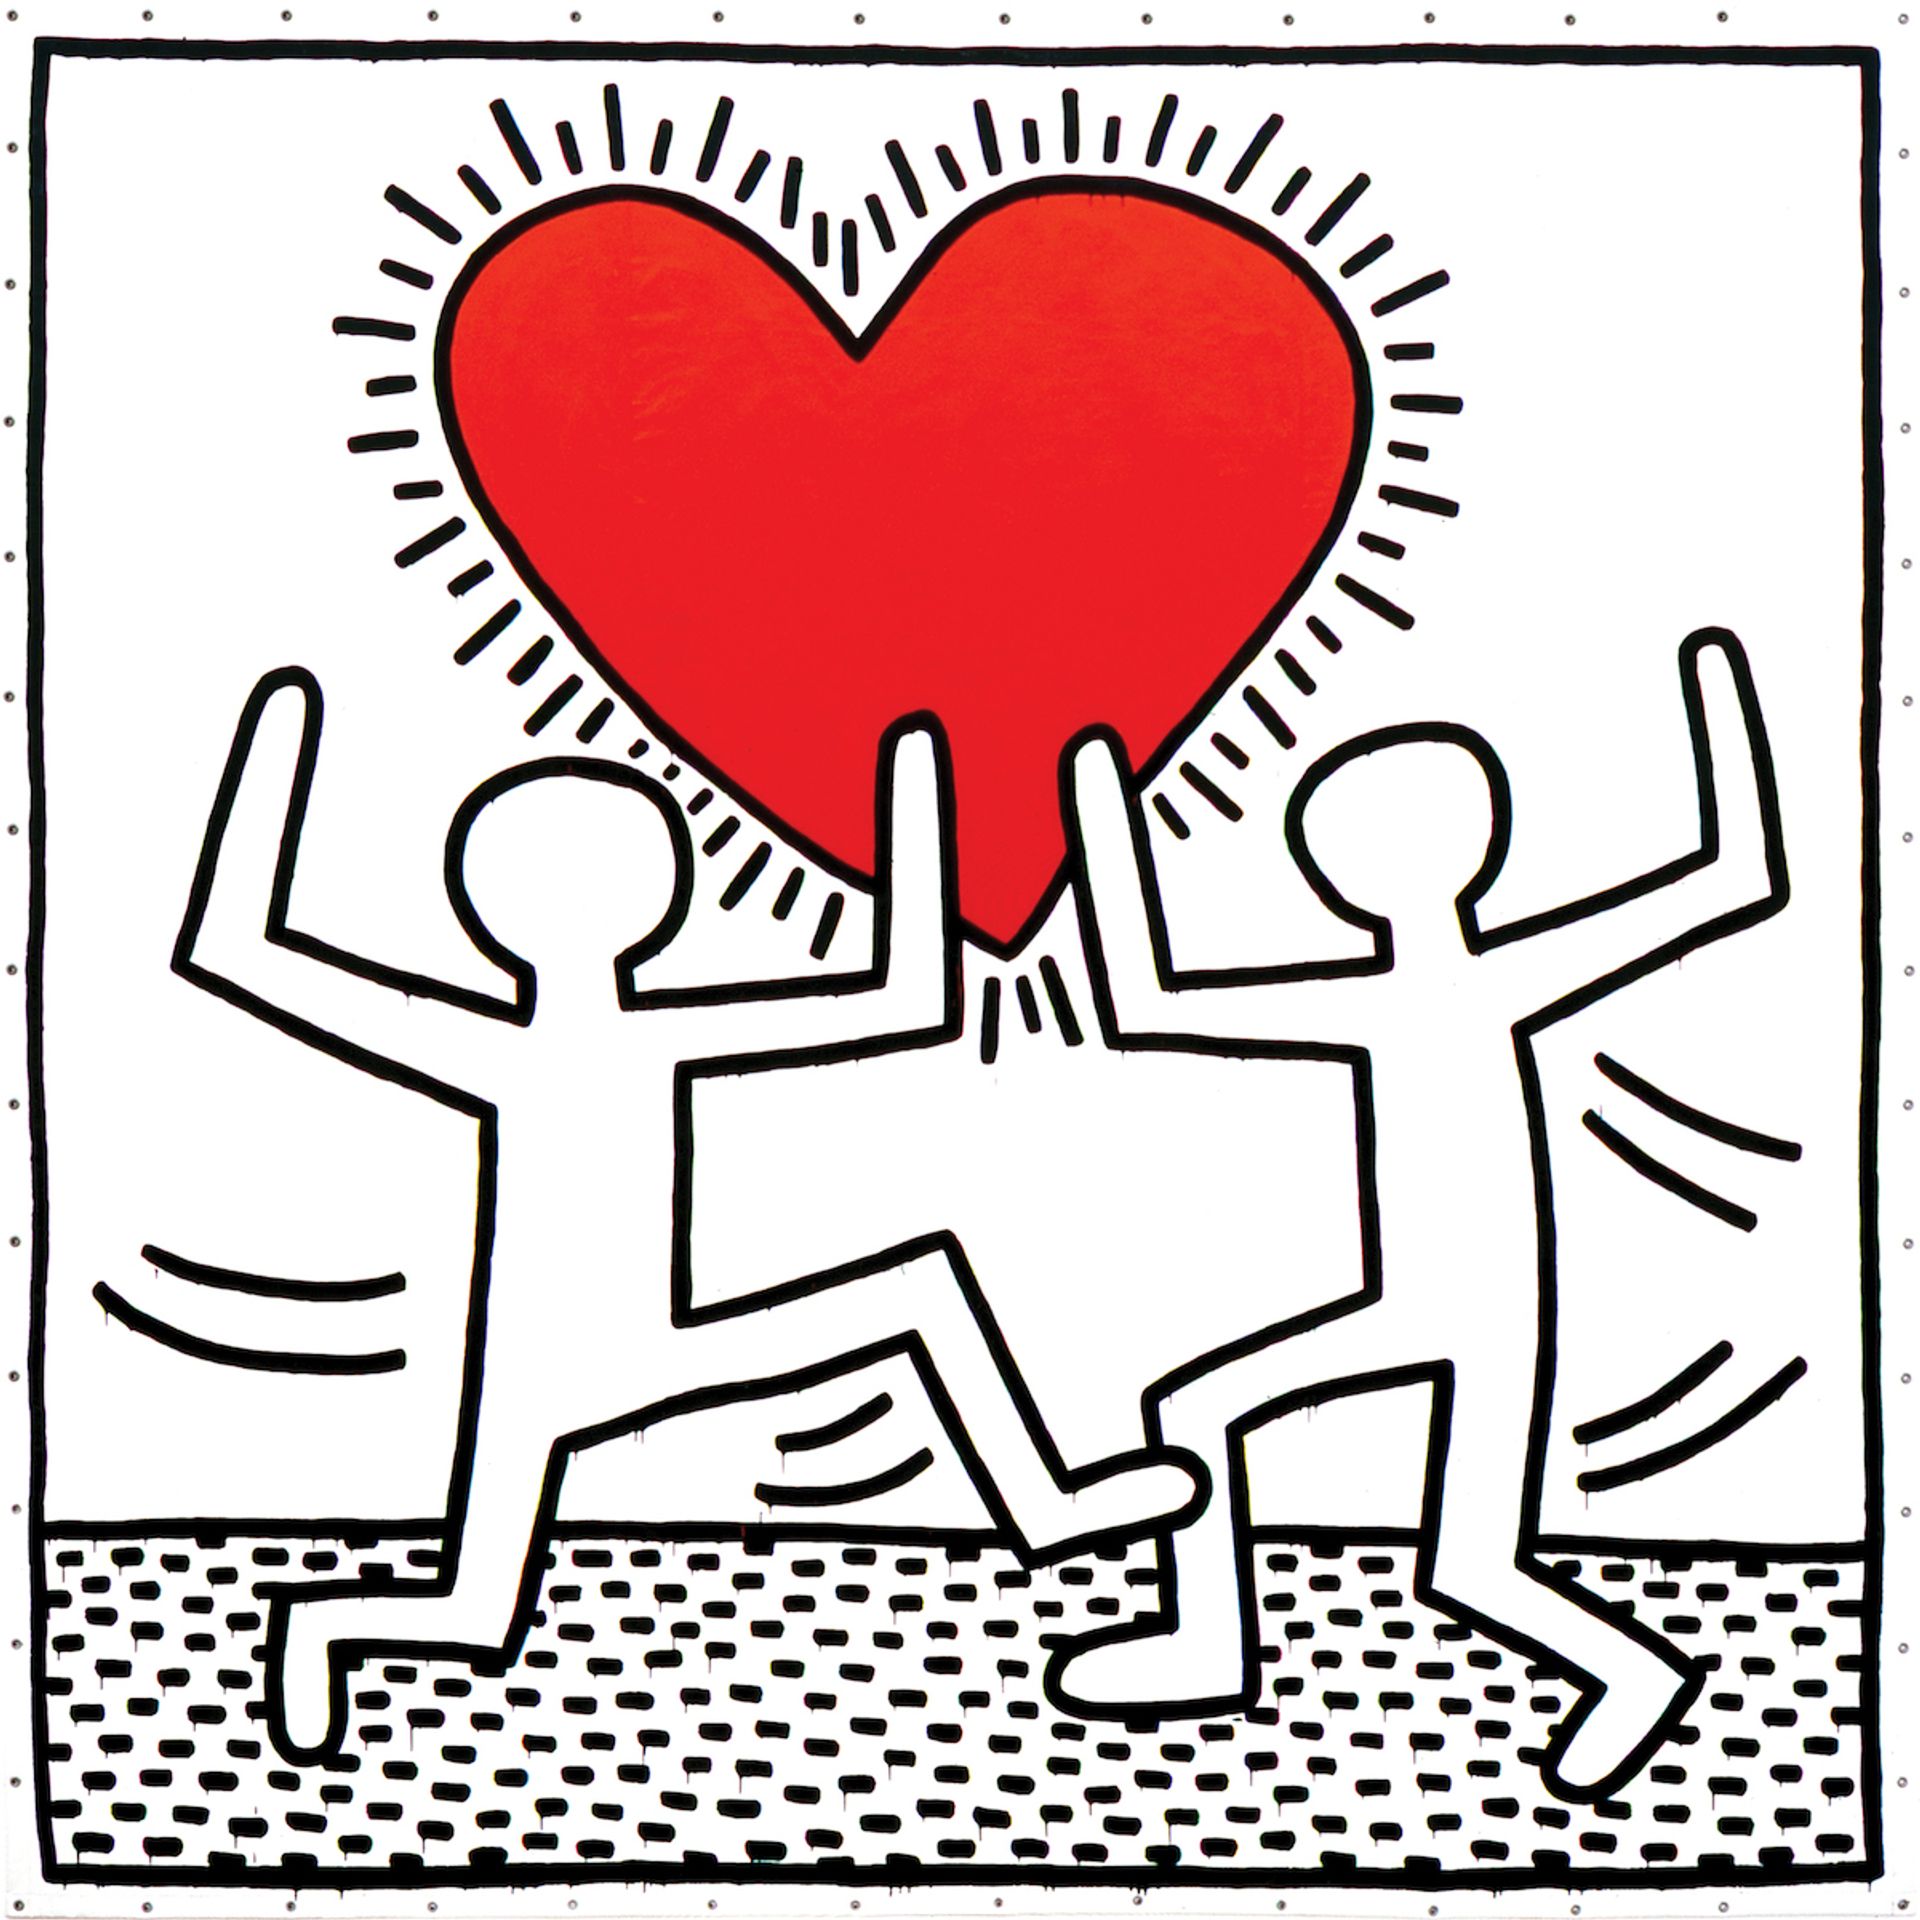 Keith Haring, Untitled, 1982, acquired by Mera and Don Rubell in 1982. © Keith Haring Foundation and courtesy of the Rubell Museum